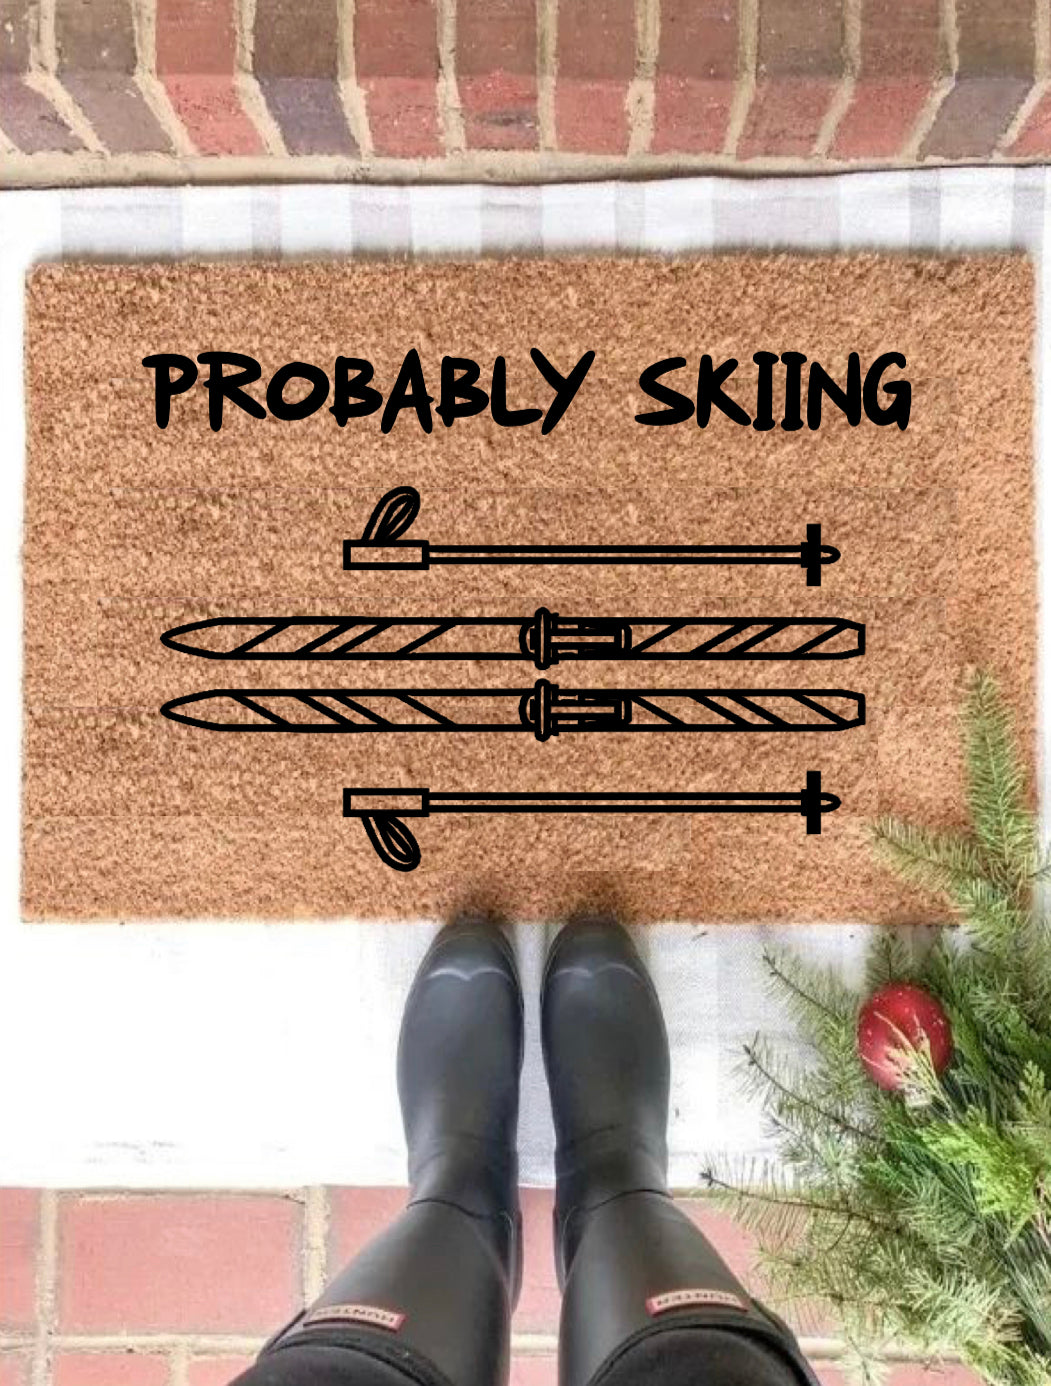 Probably Skiing